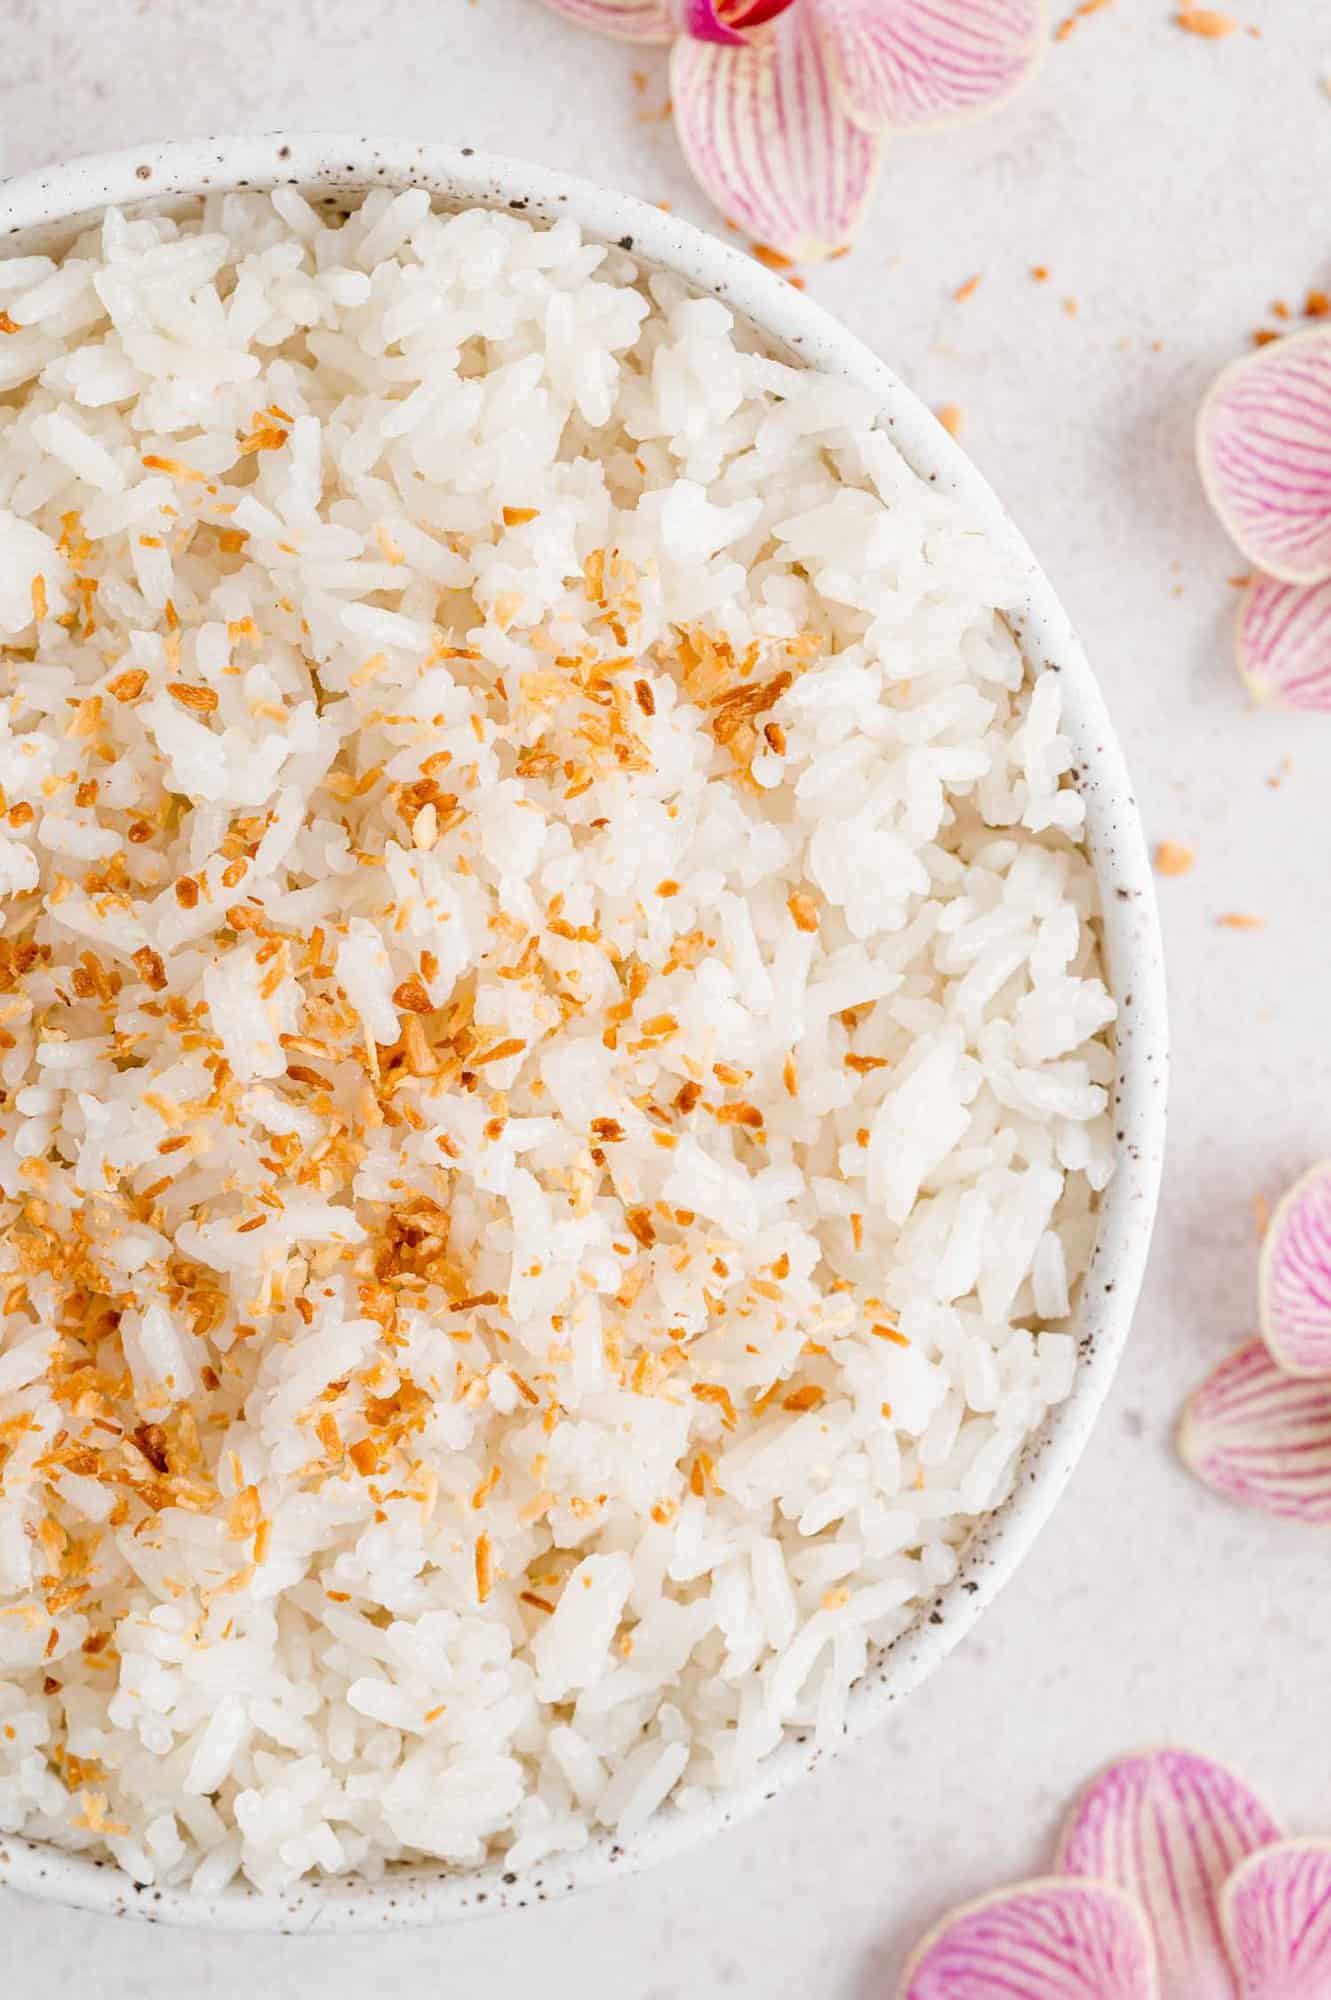 Coconut rice in a white bowl, garnished with toasted flaked coconut.